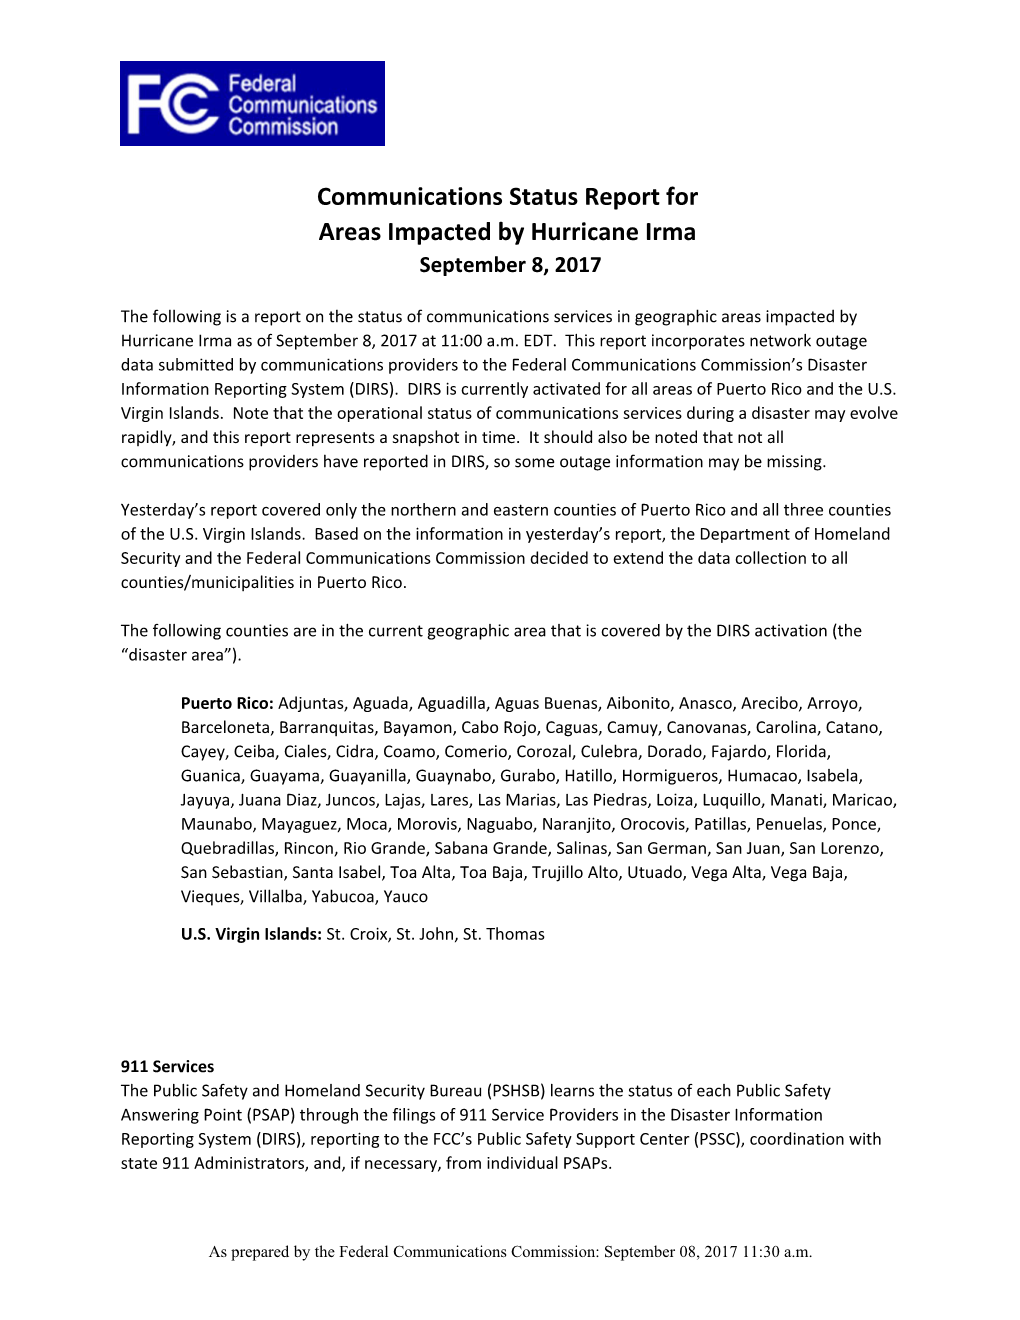 Communications Status Report For